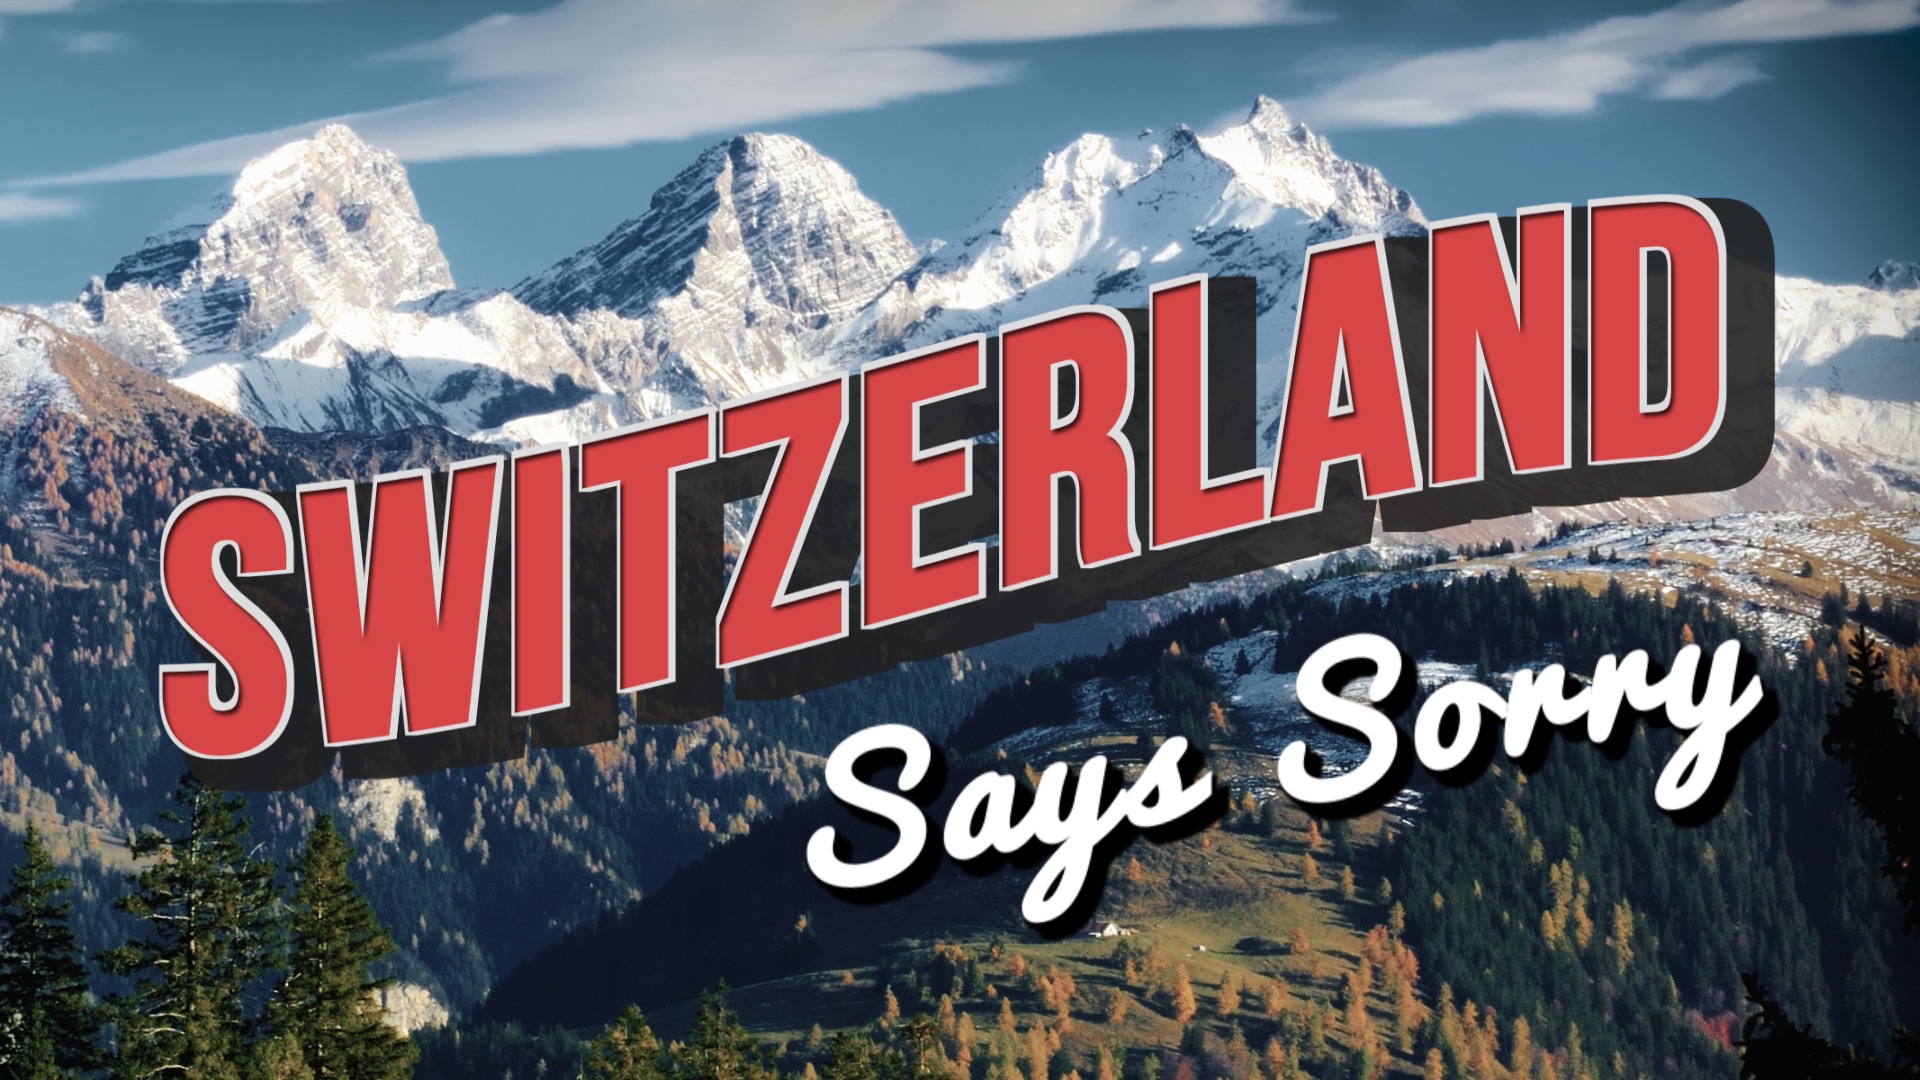 Swiss mountains with the series title written on them